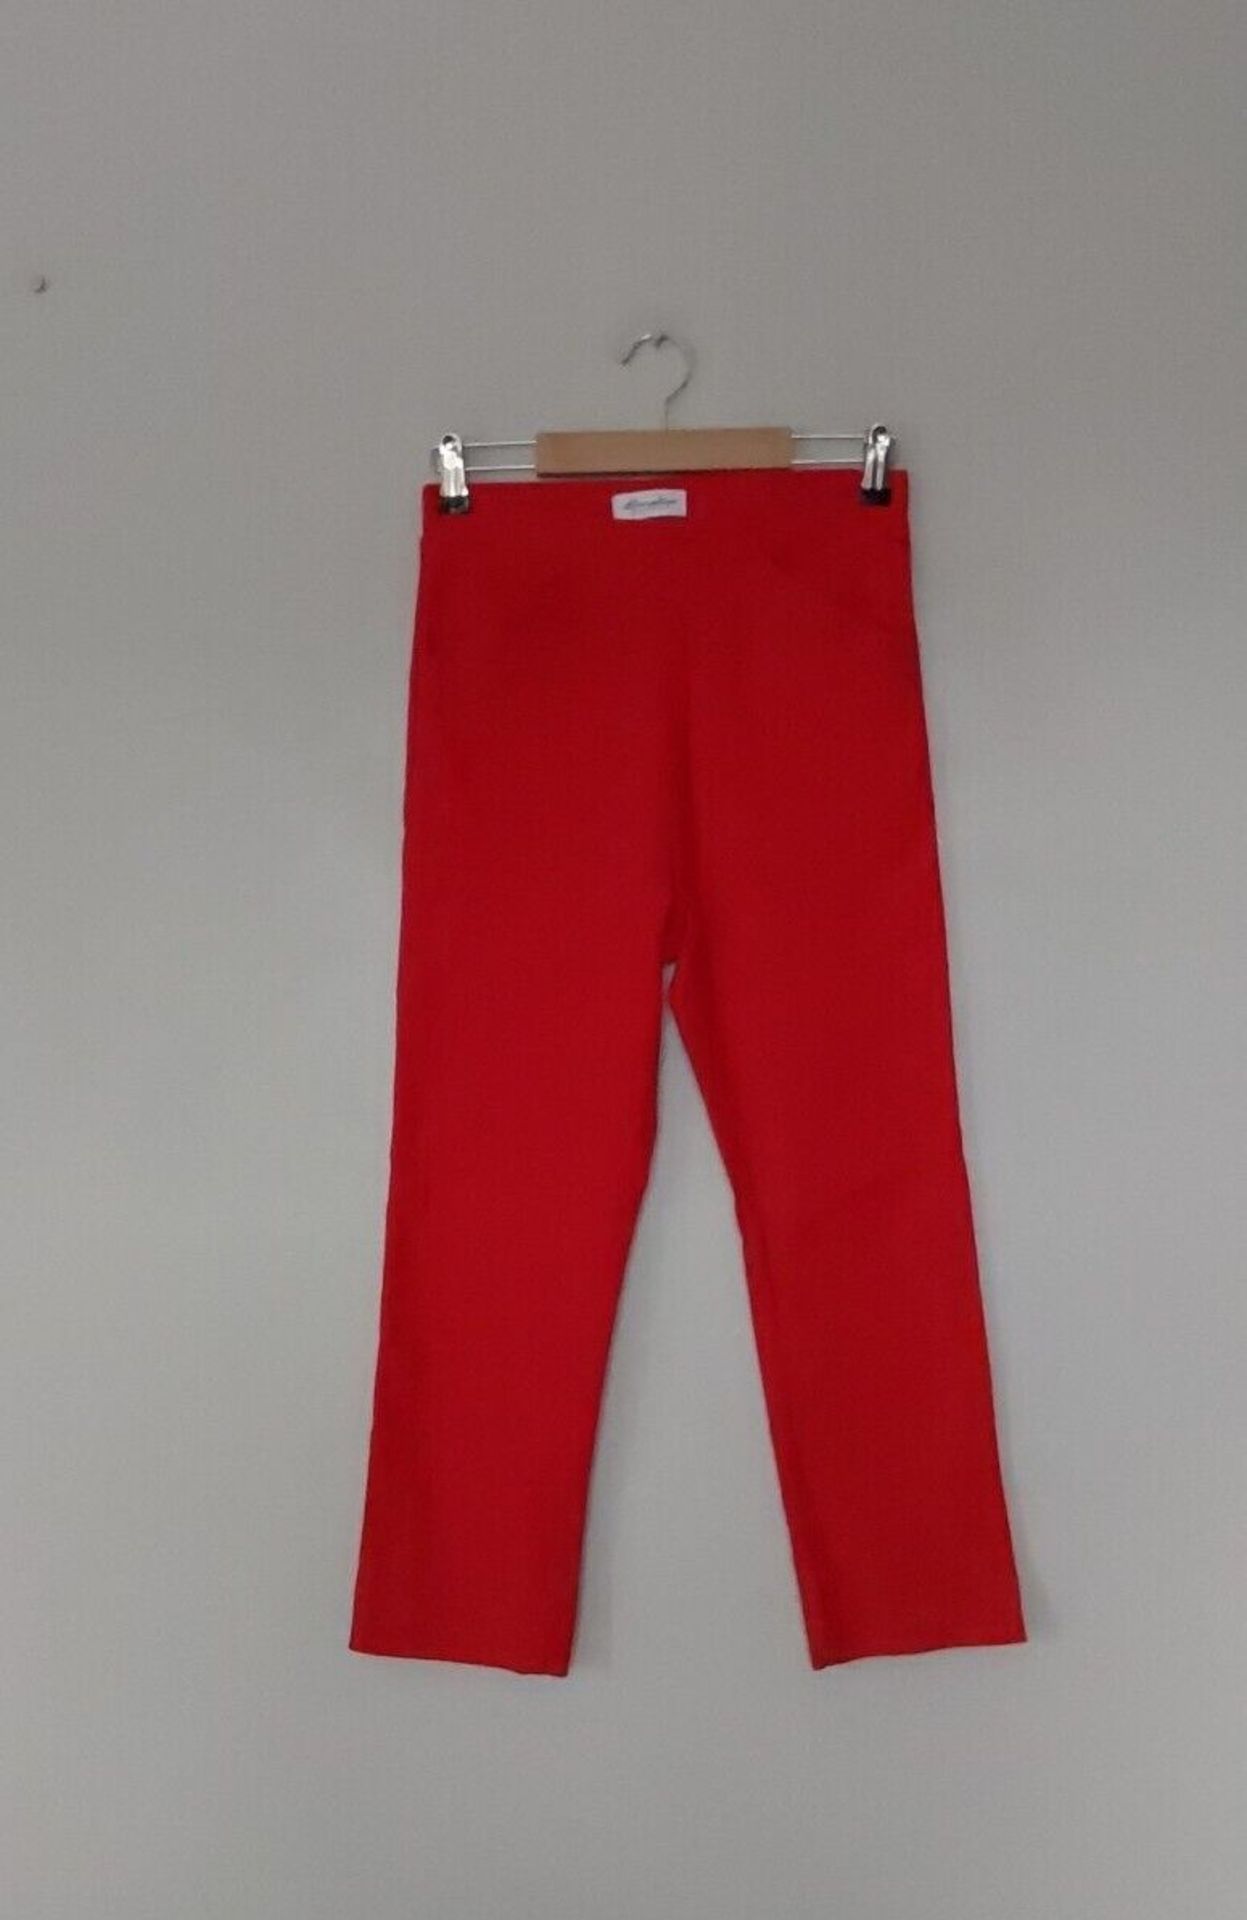 40 X BRAND NEW EMELIA X RED SUPERSTRETCH TROUSERS IN VARIOUS SIZES R11-4